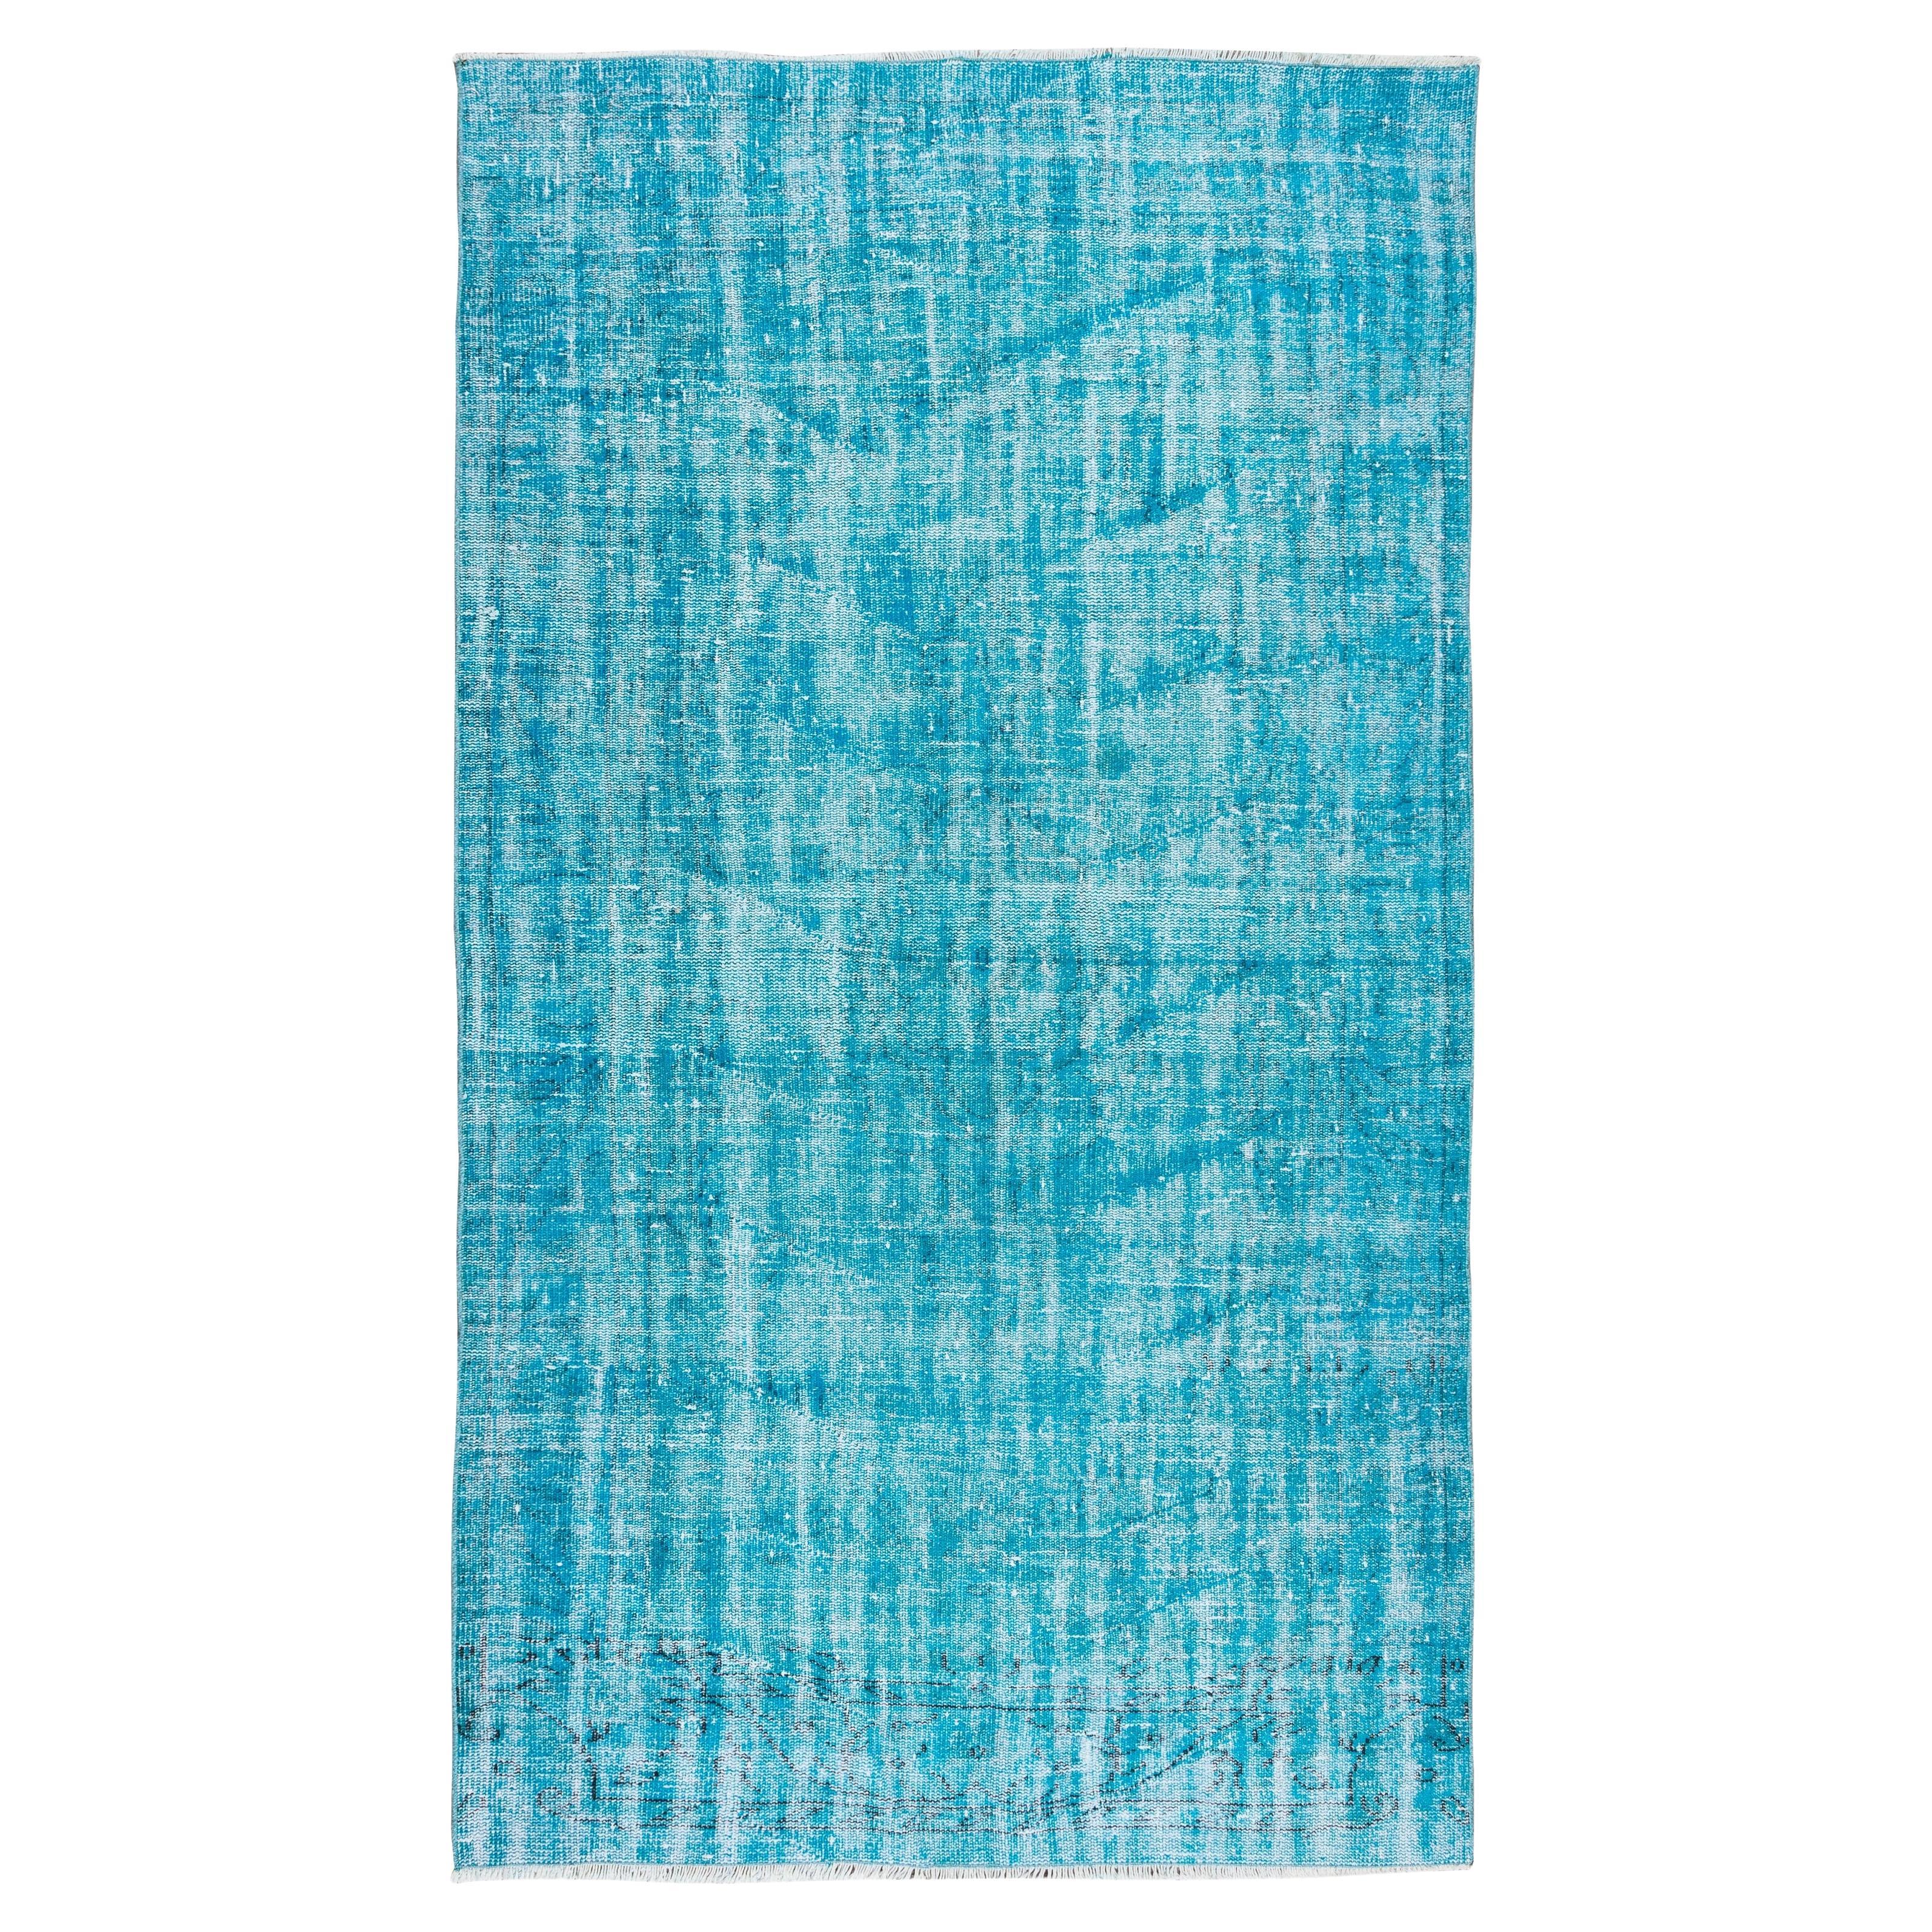 4.9x8.6 Ft Vintage Handmade Rug Over-Dyed in Teal for Modern Office & Home